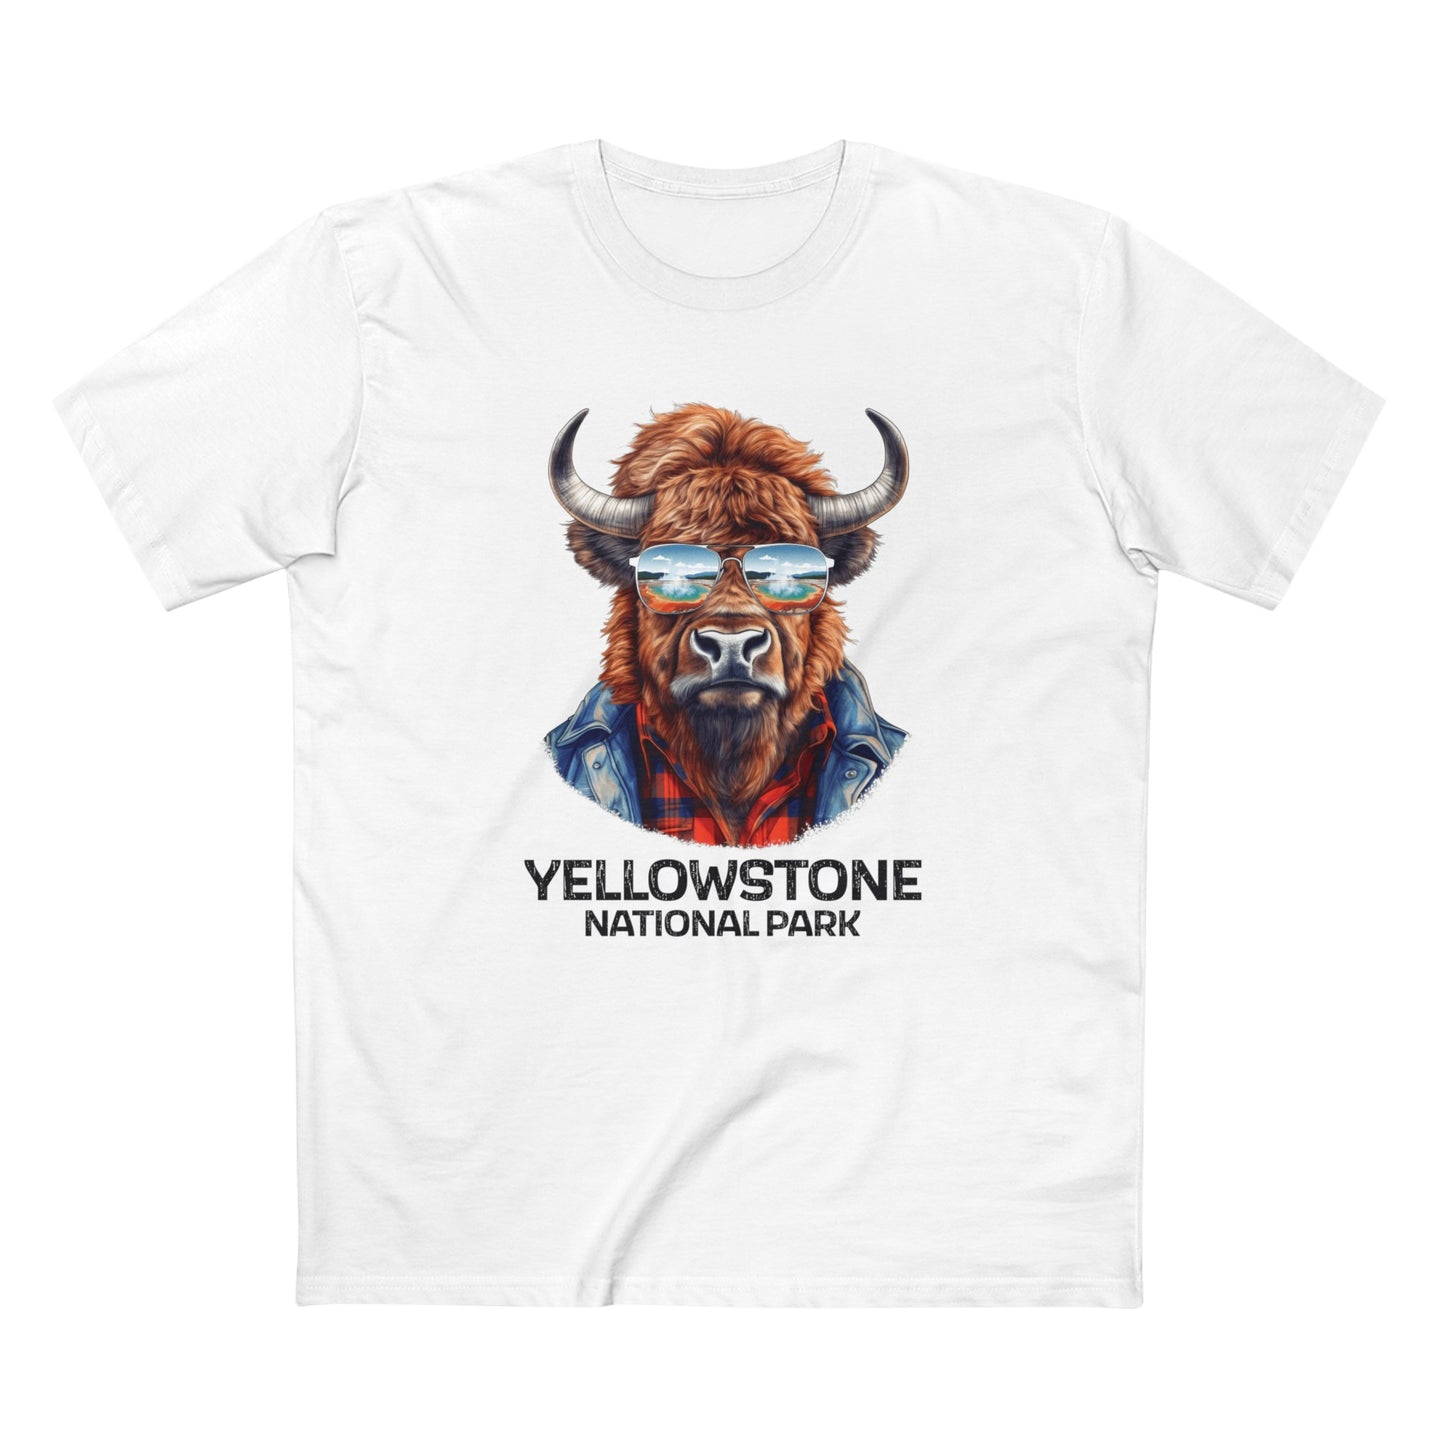 Yellowstone National Park T-Shirt - Bison